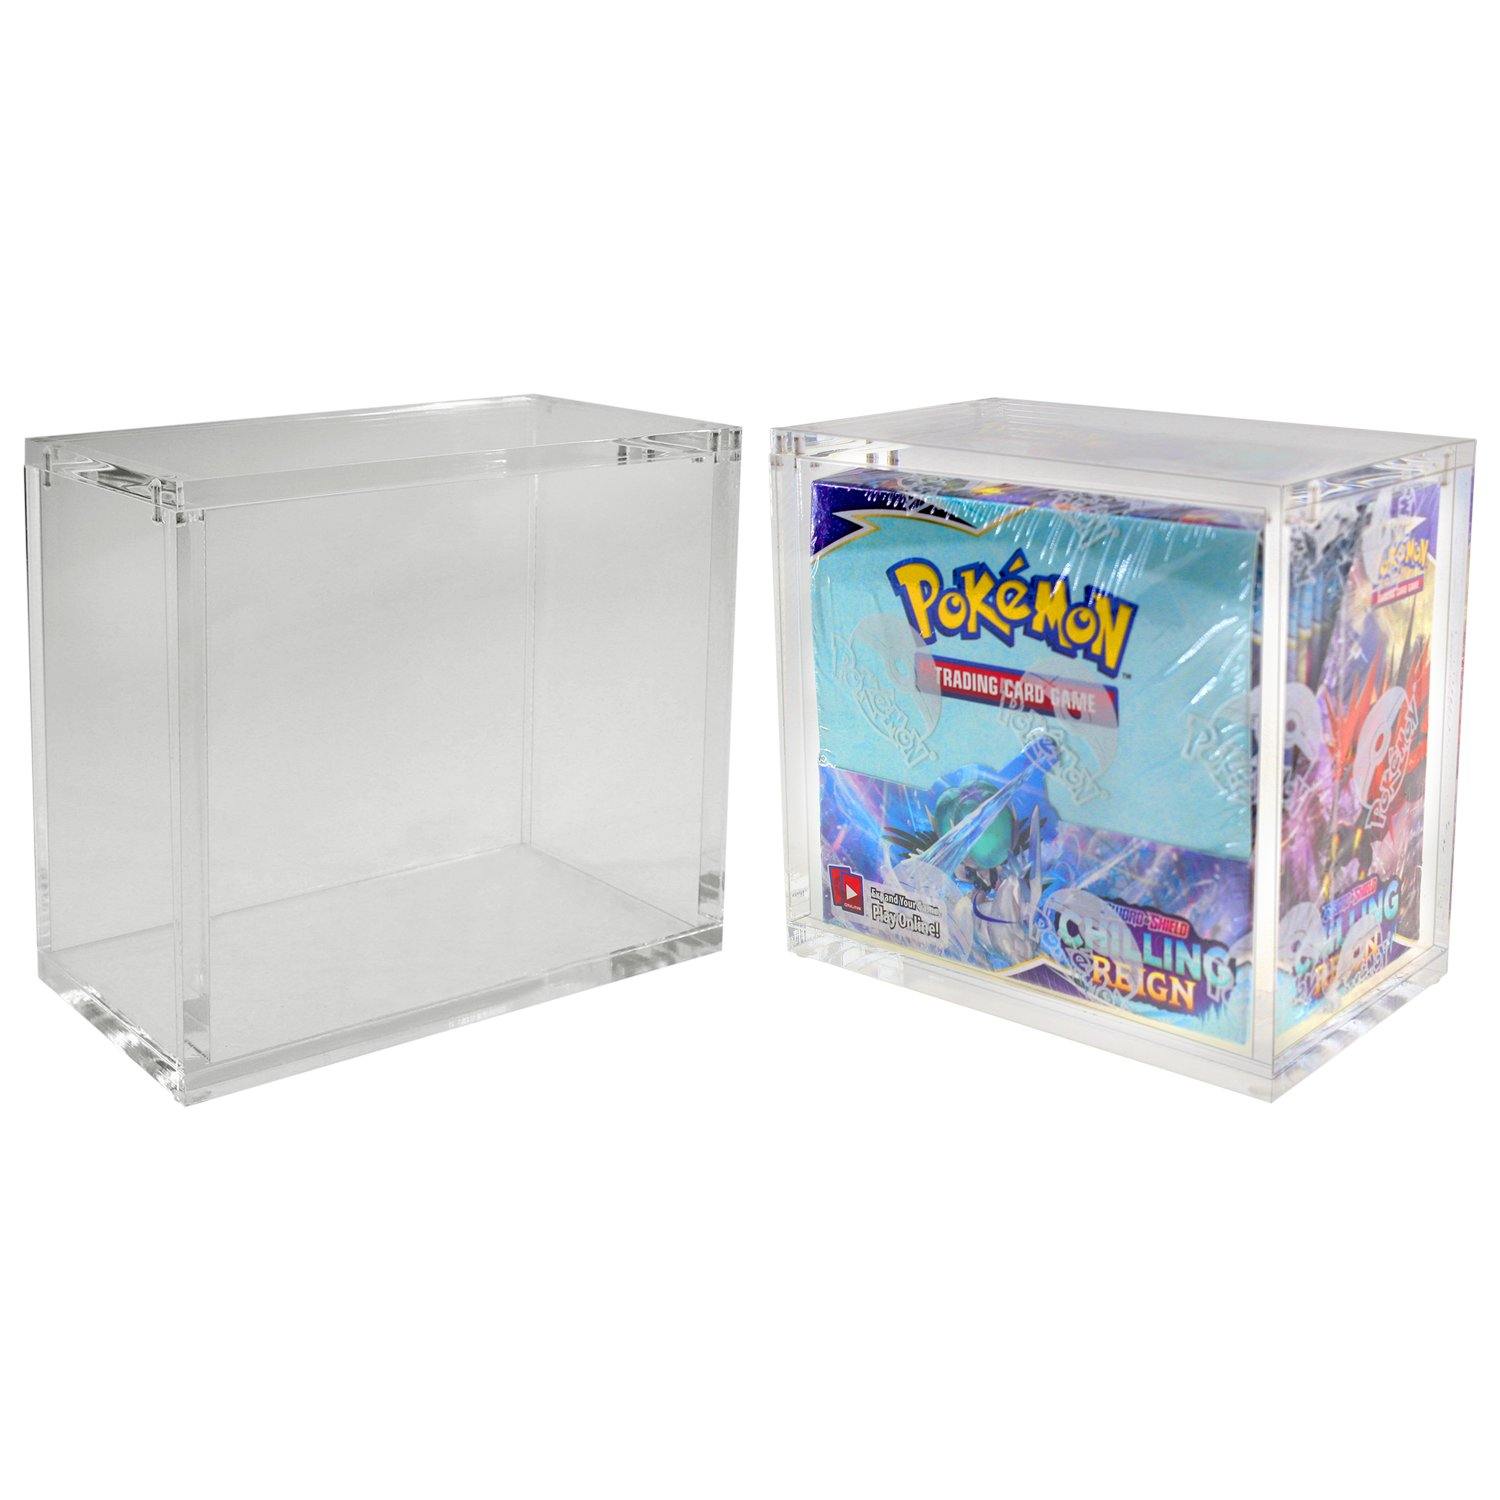 Premium Acrylic Case for Pokemon Booster Box with Magnetic Top - Platinum Protectors